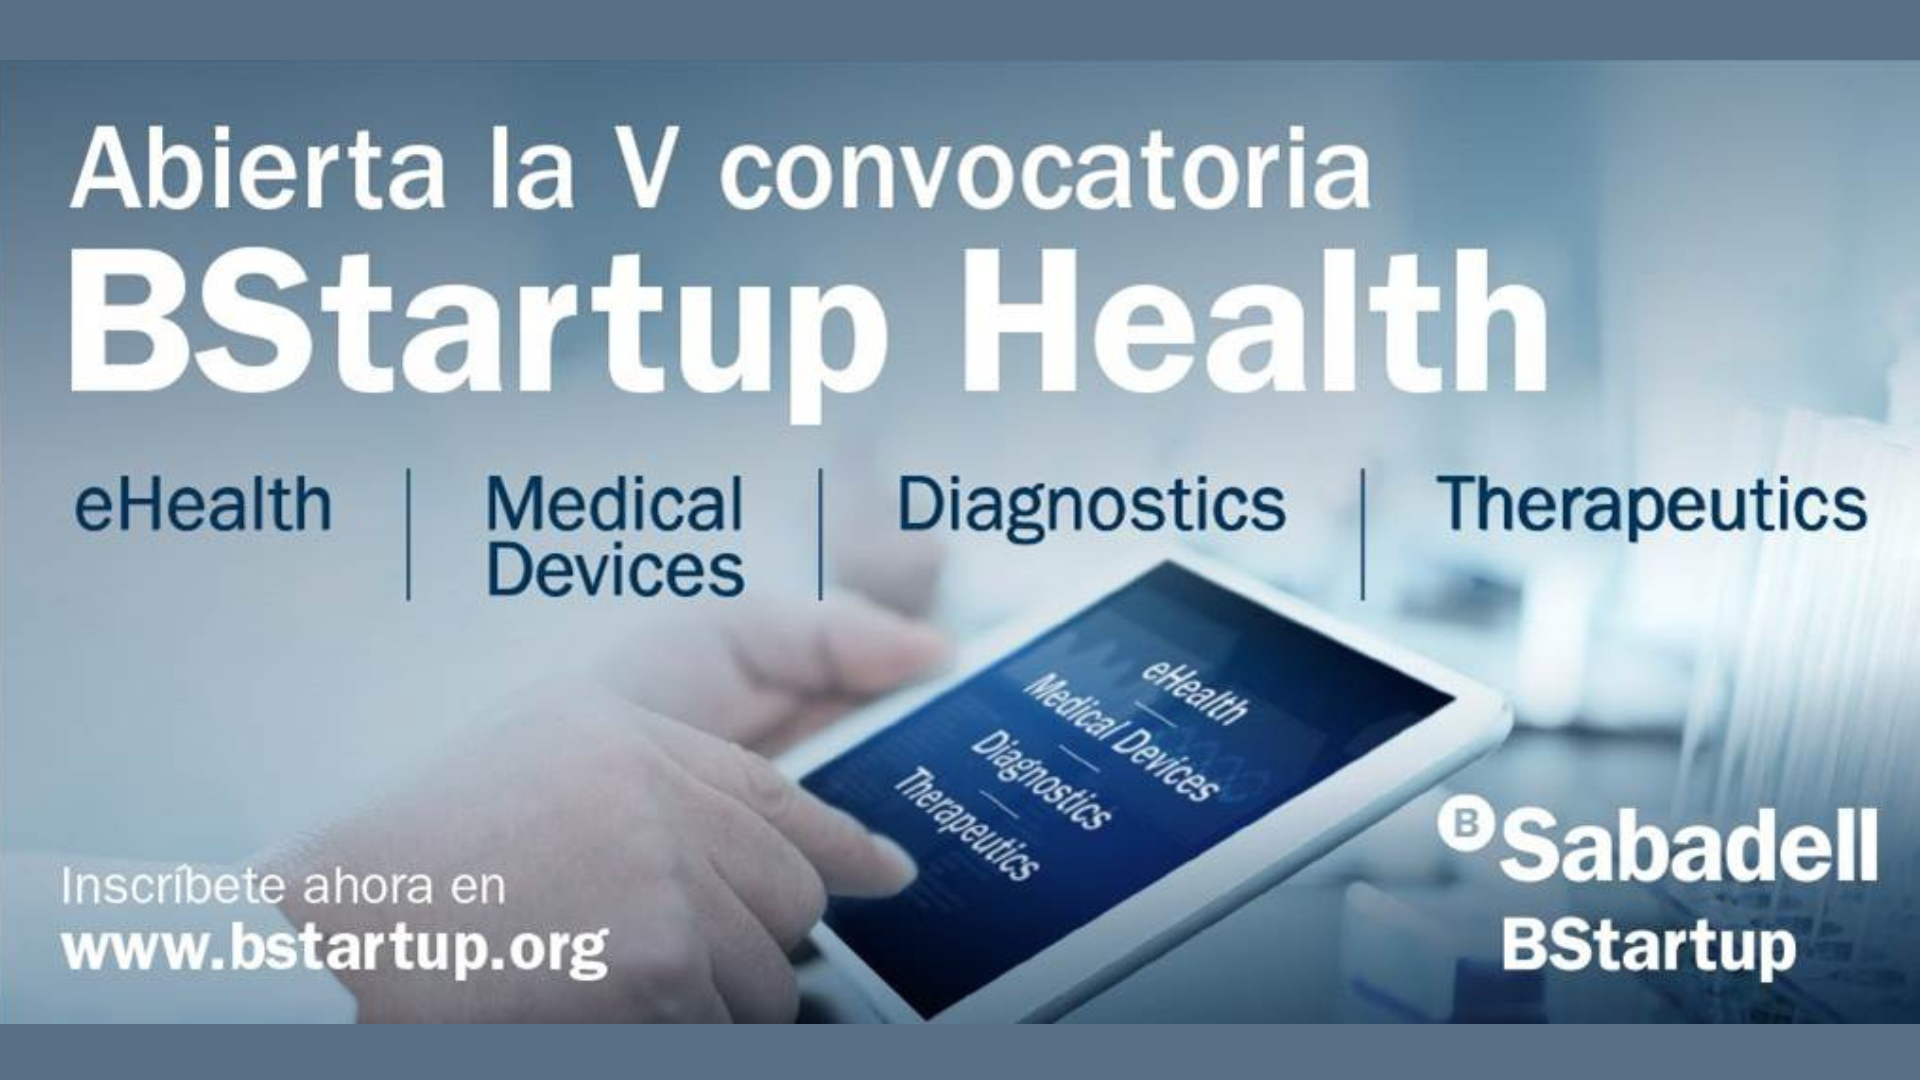 Apply now for the call for investment by BStartup Health